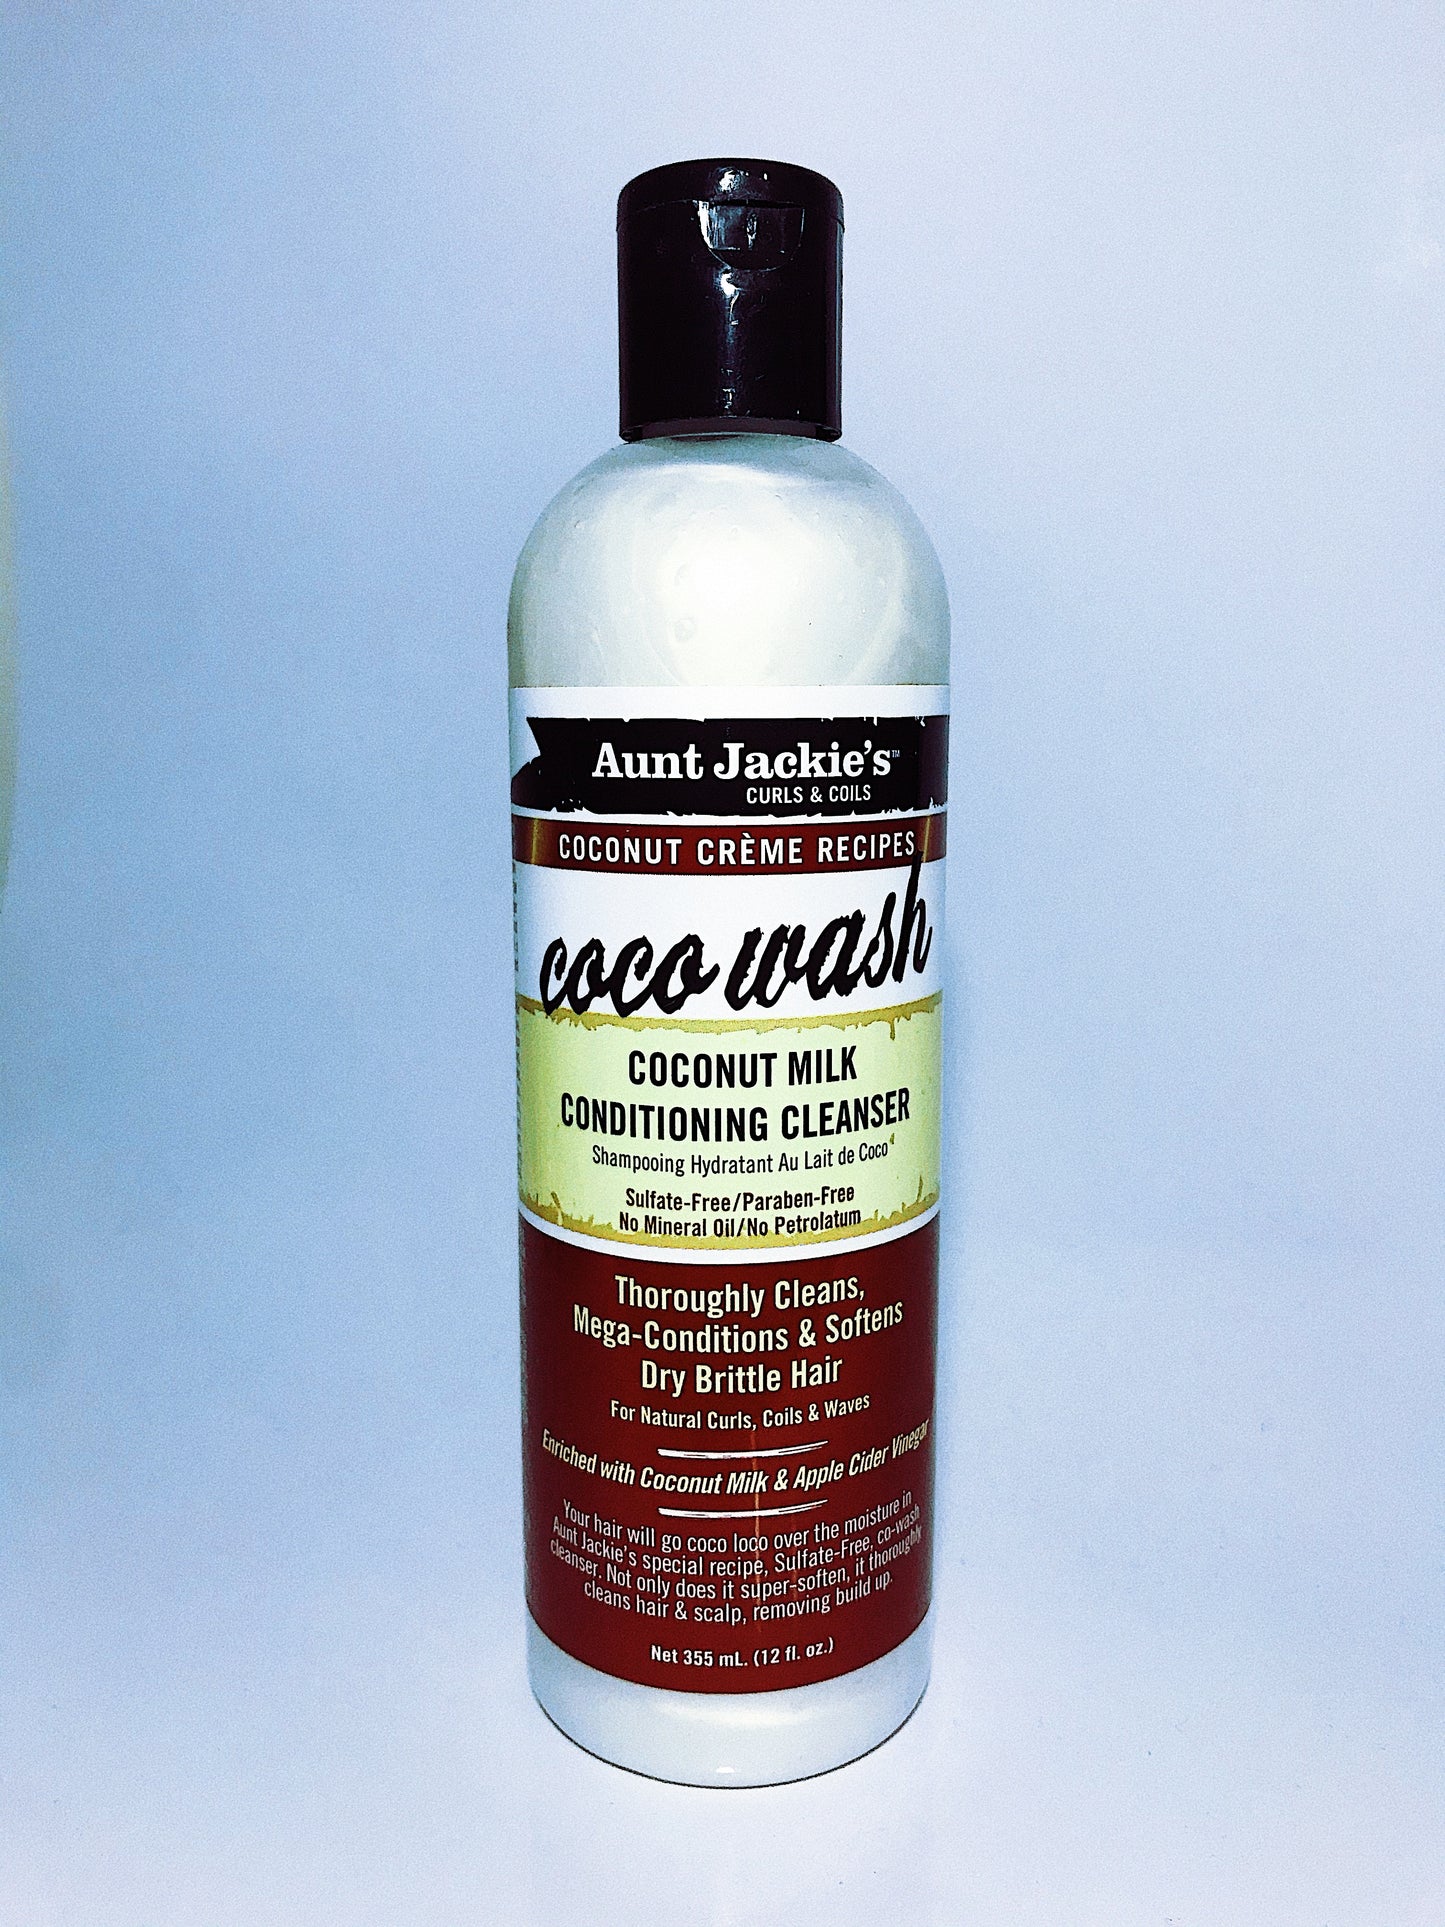 aunt-jackies-coco-wash-coconut-milk-conditioning-cleanser.jpg